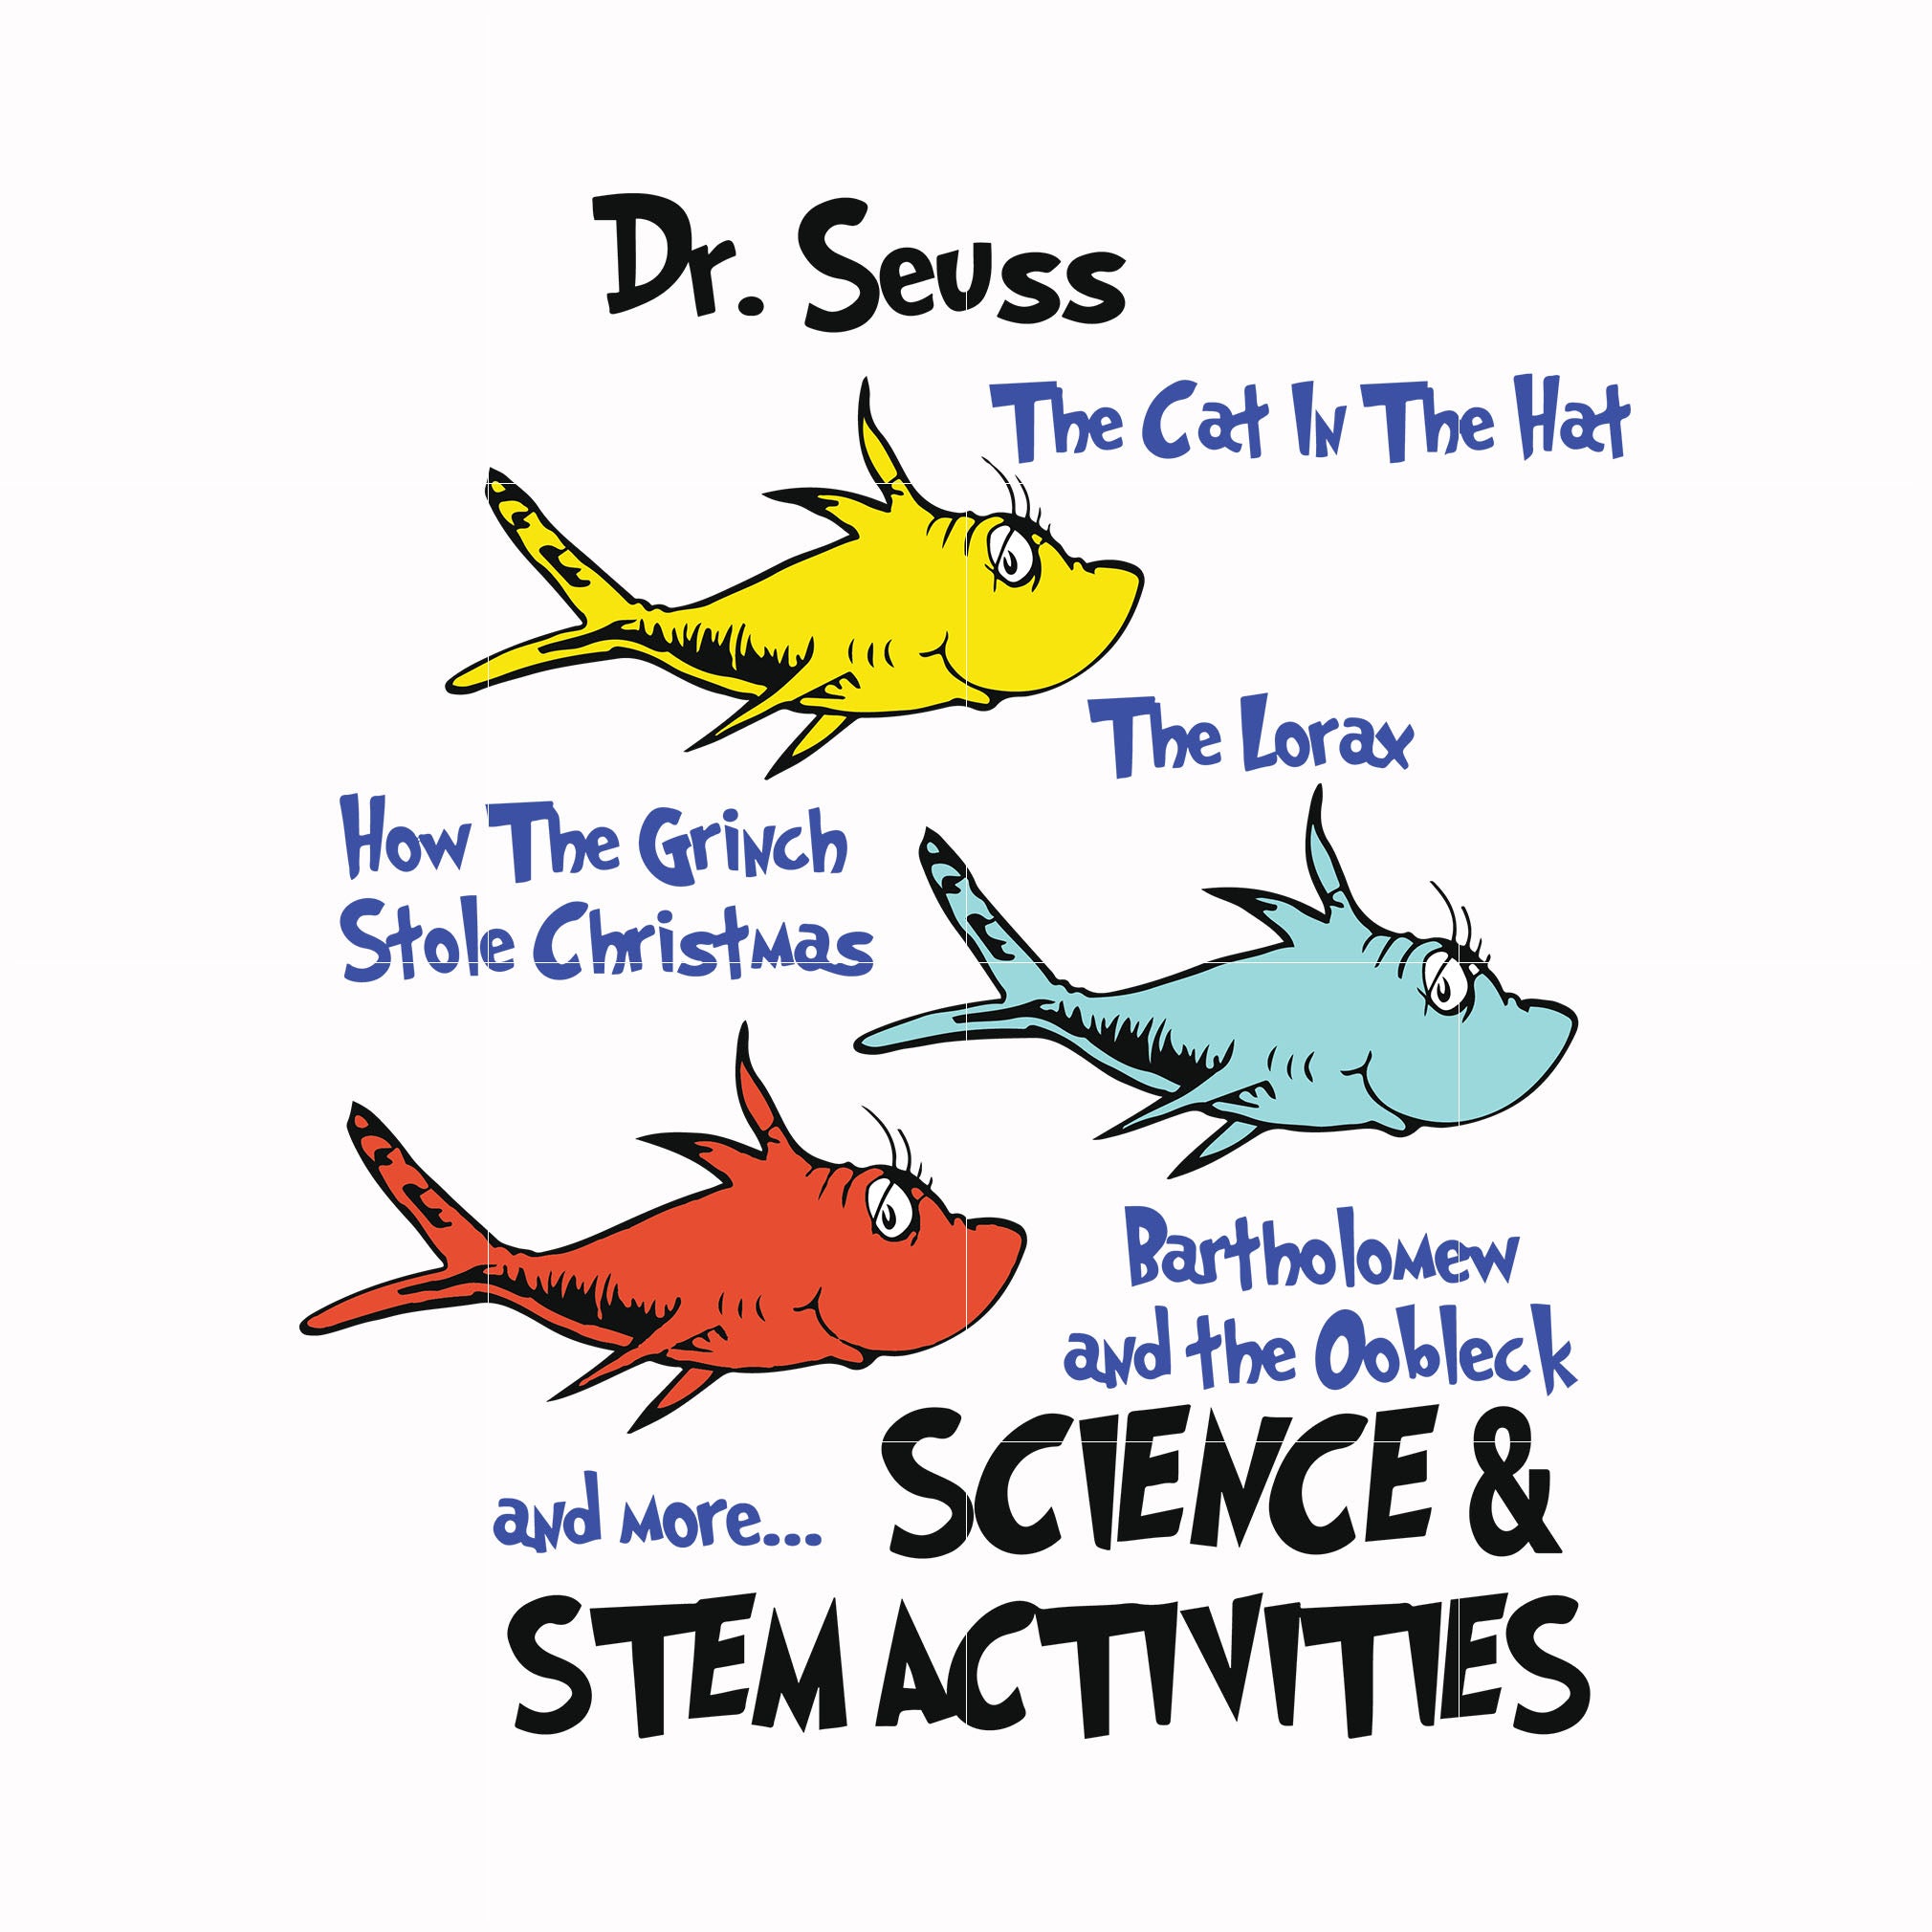 Dr. Seuss the cat in the hat how the grinch stole Christmas and more science & stem activities svg, png, dxf, eps file